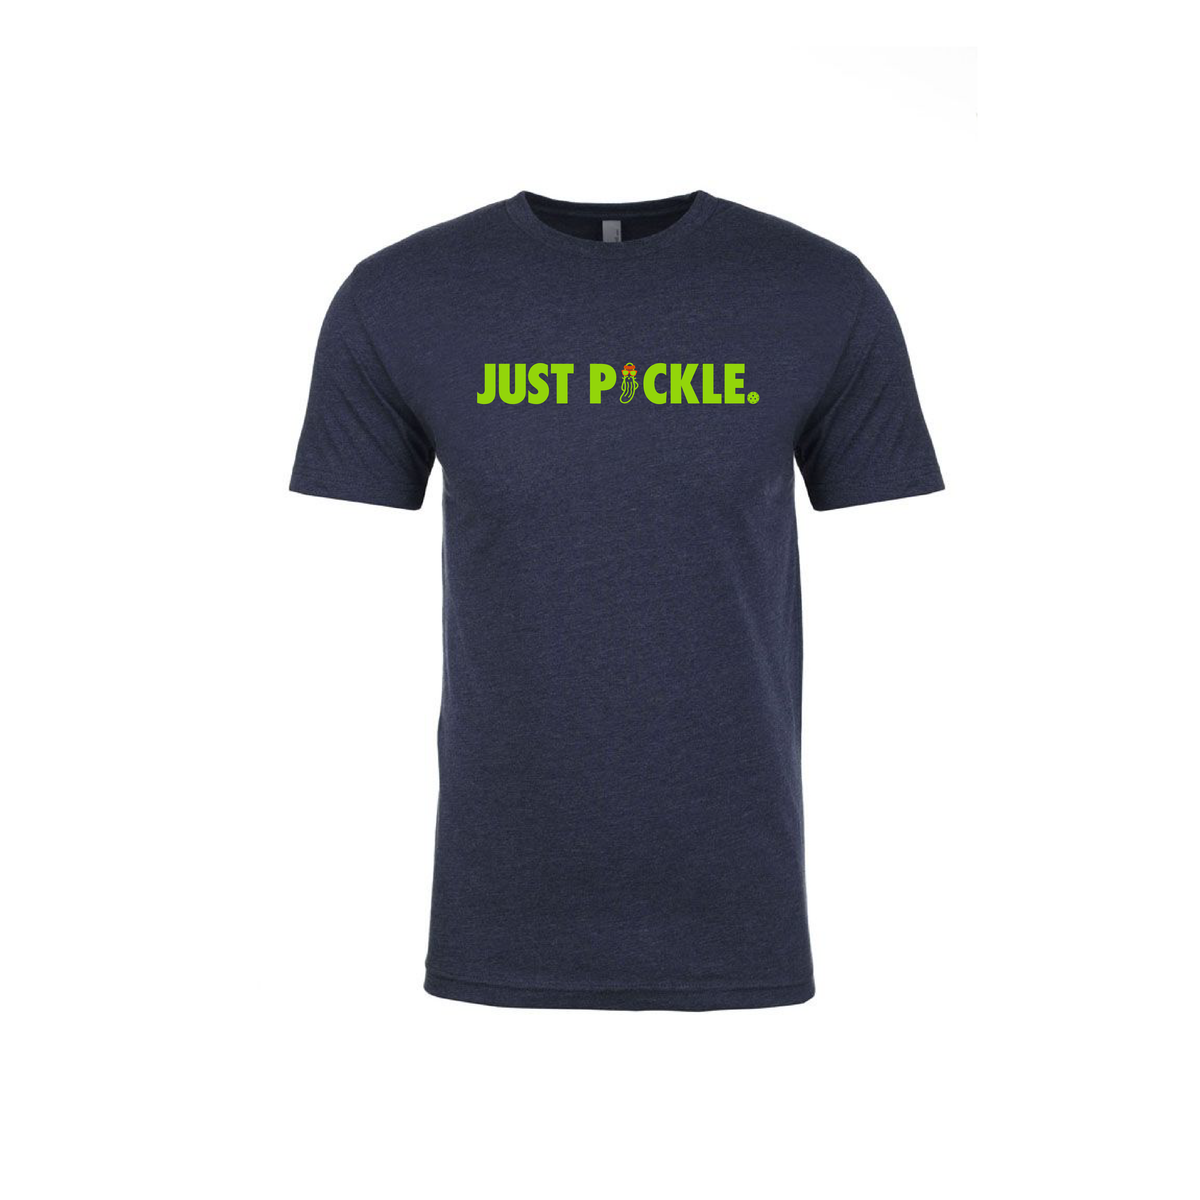 JUST PICKLE. (Navy/Lime)